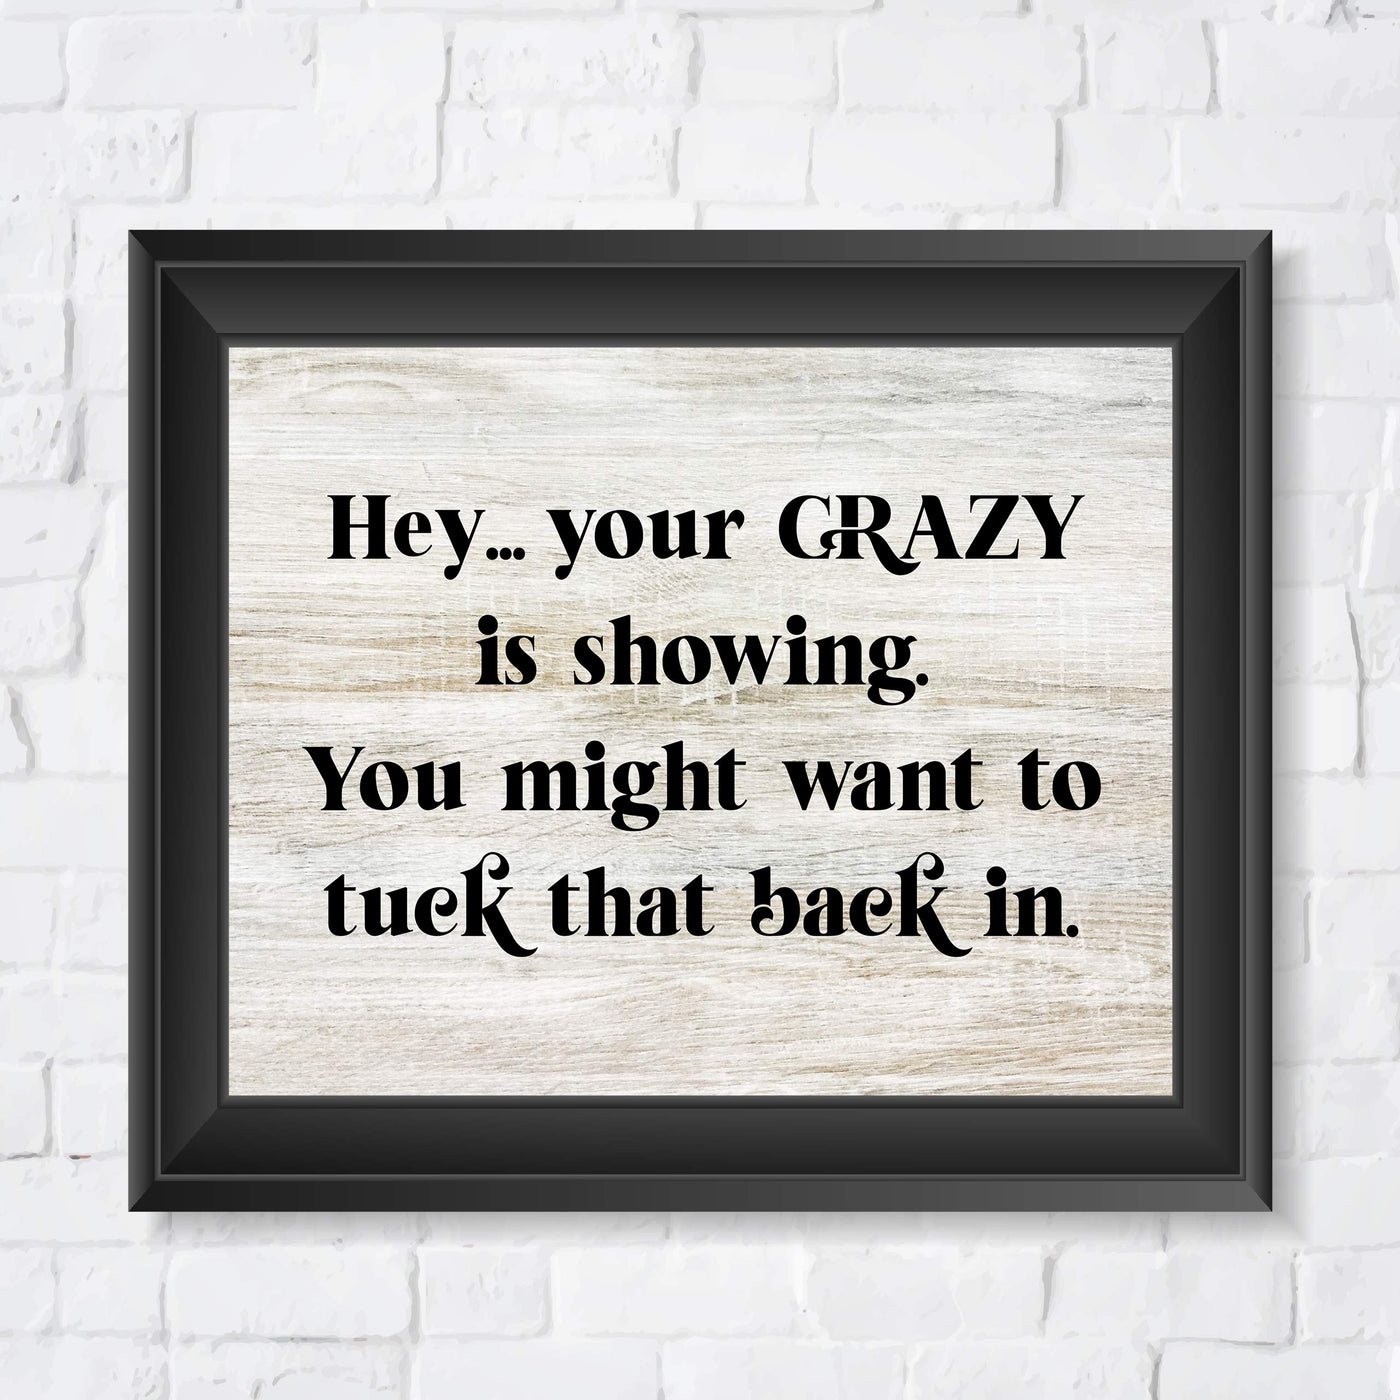 Your Crazy Is Showing-Might Want to Tuck That Back In Funny Wall Decor -10 x 8" Sarcastic Art Print-Ready to Frame. Home-Office-Bar-Shop-Man Cave Decor. Fun Novelty Gift! Printed on Photo Paper.